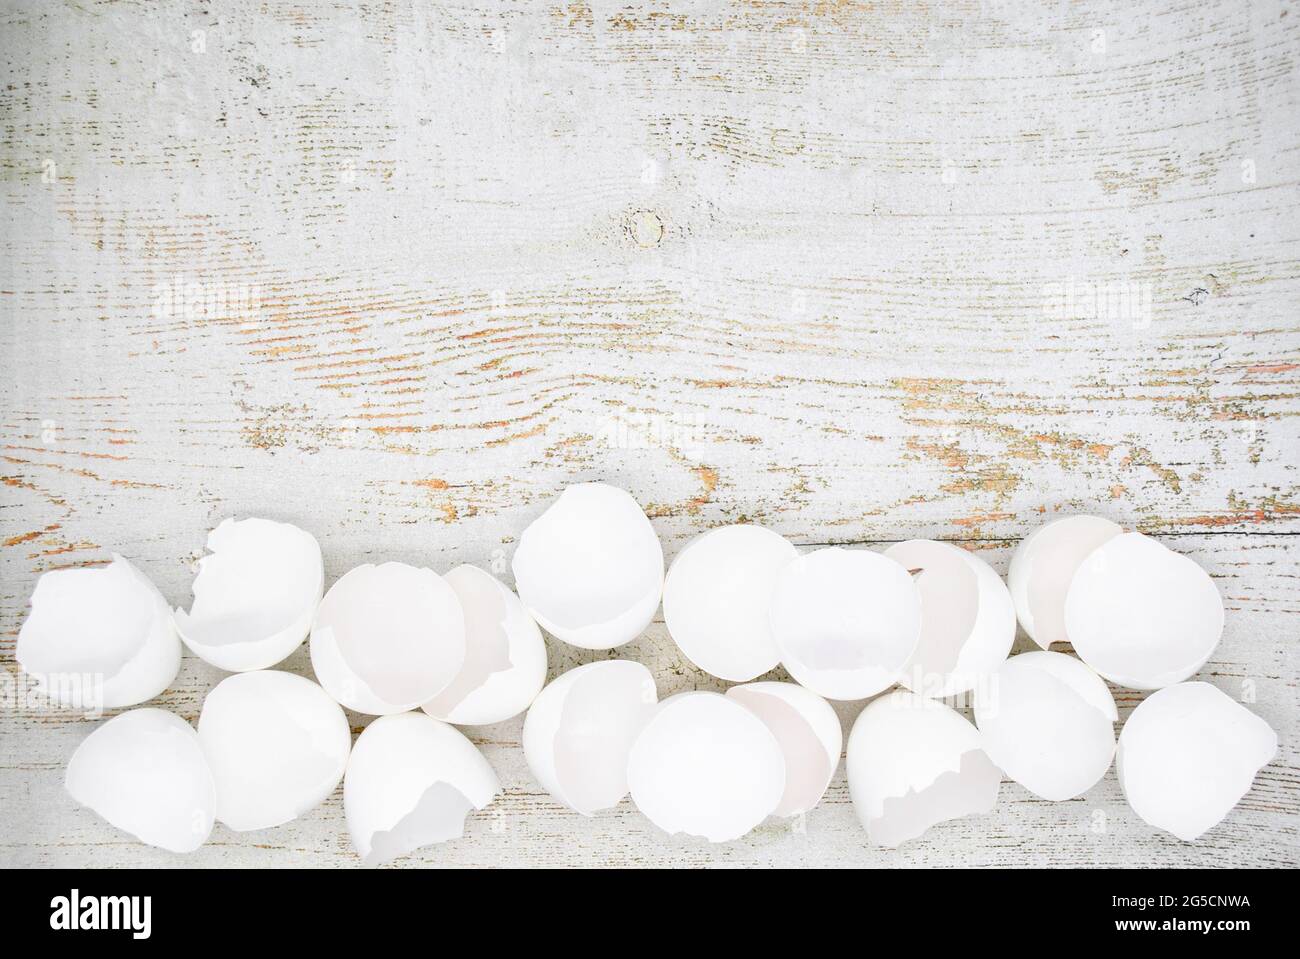 Lots of broken white eggshells on a light wooden background. Copy space. Stock Photo